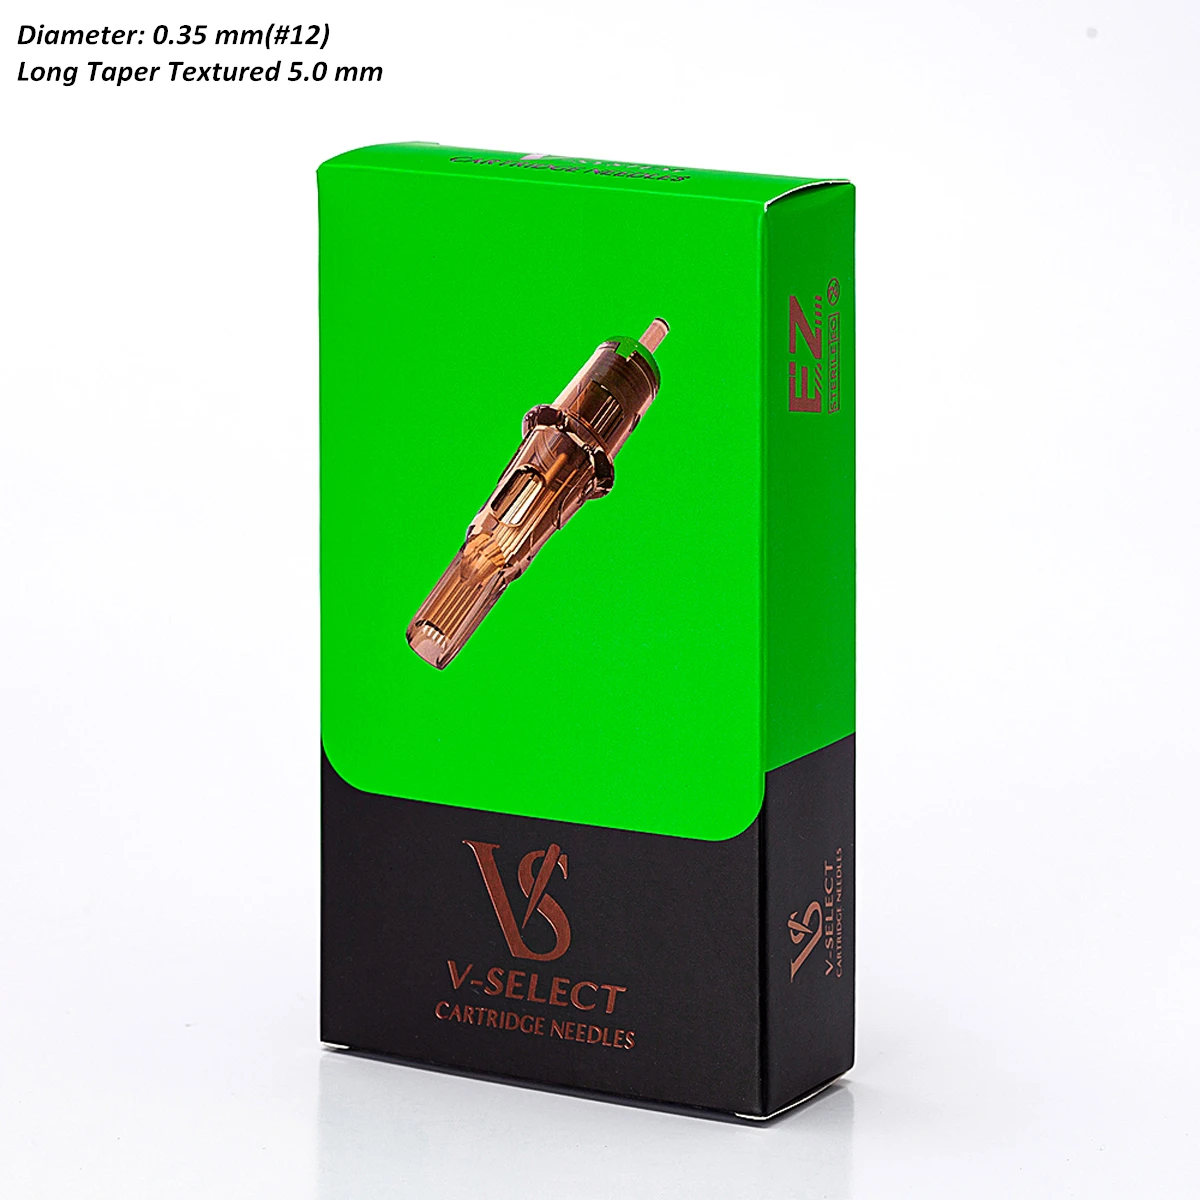 EZ V Select Tattoo Needle Cartridges Magnum (M1) #12 (0.35 MM) Long Taper Textured for Rotary Pen Machine Grips 20 Pcs/Box